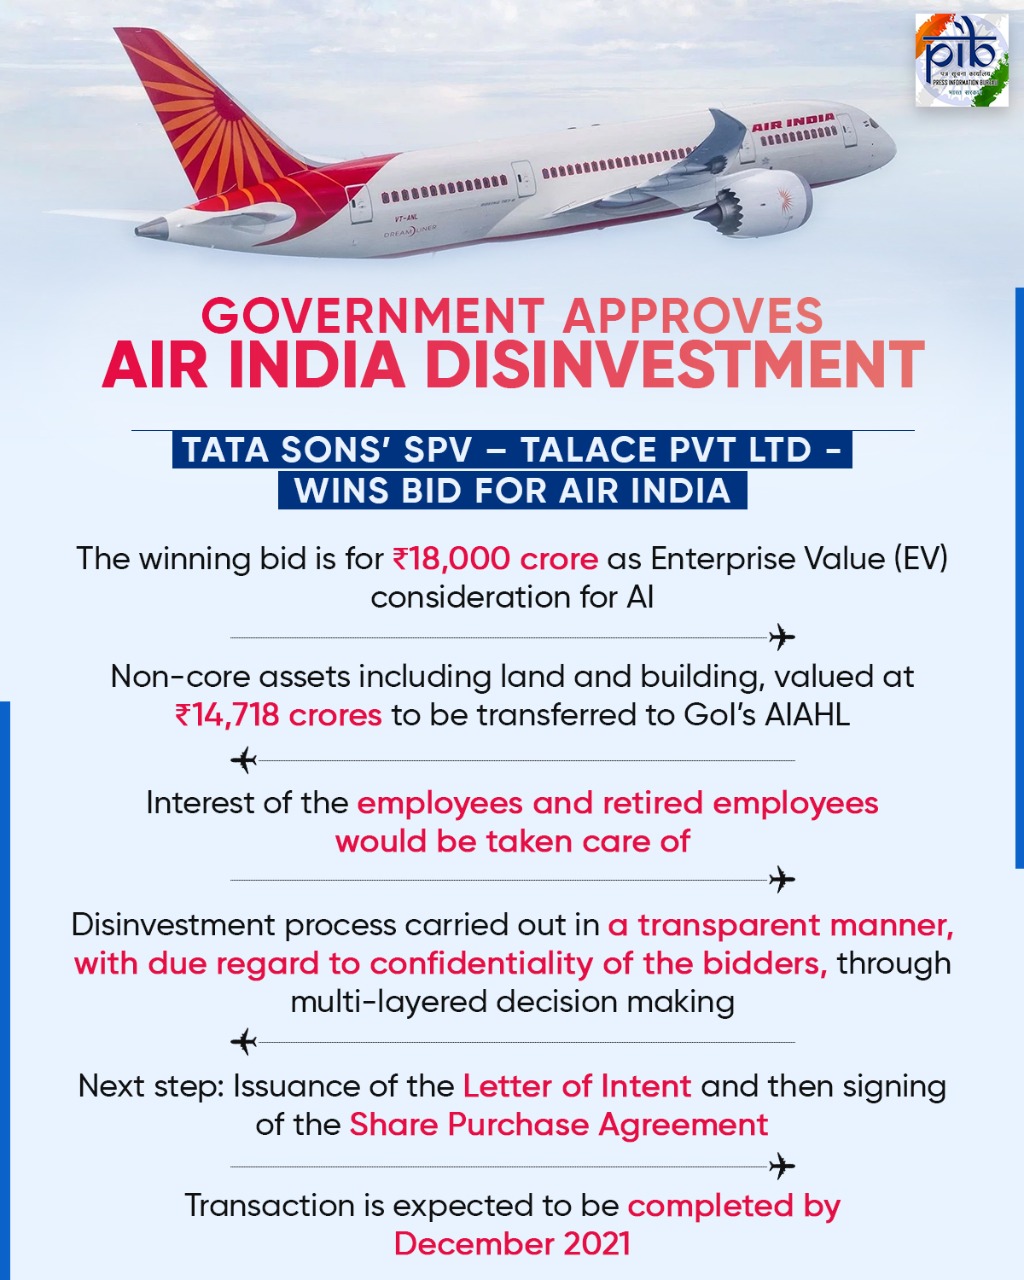 Government Approves Air India Disinvestment